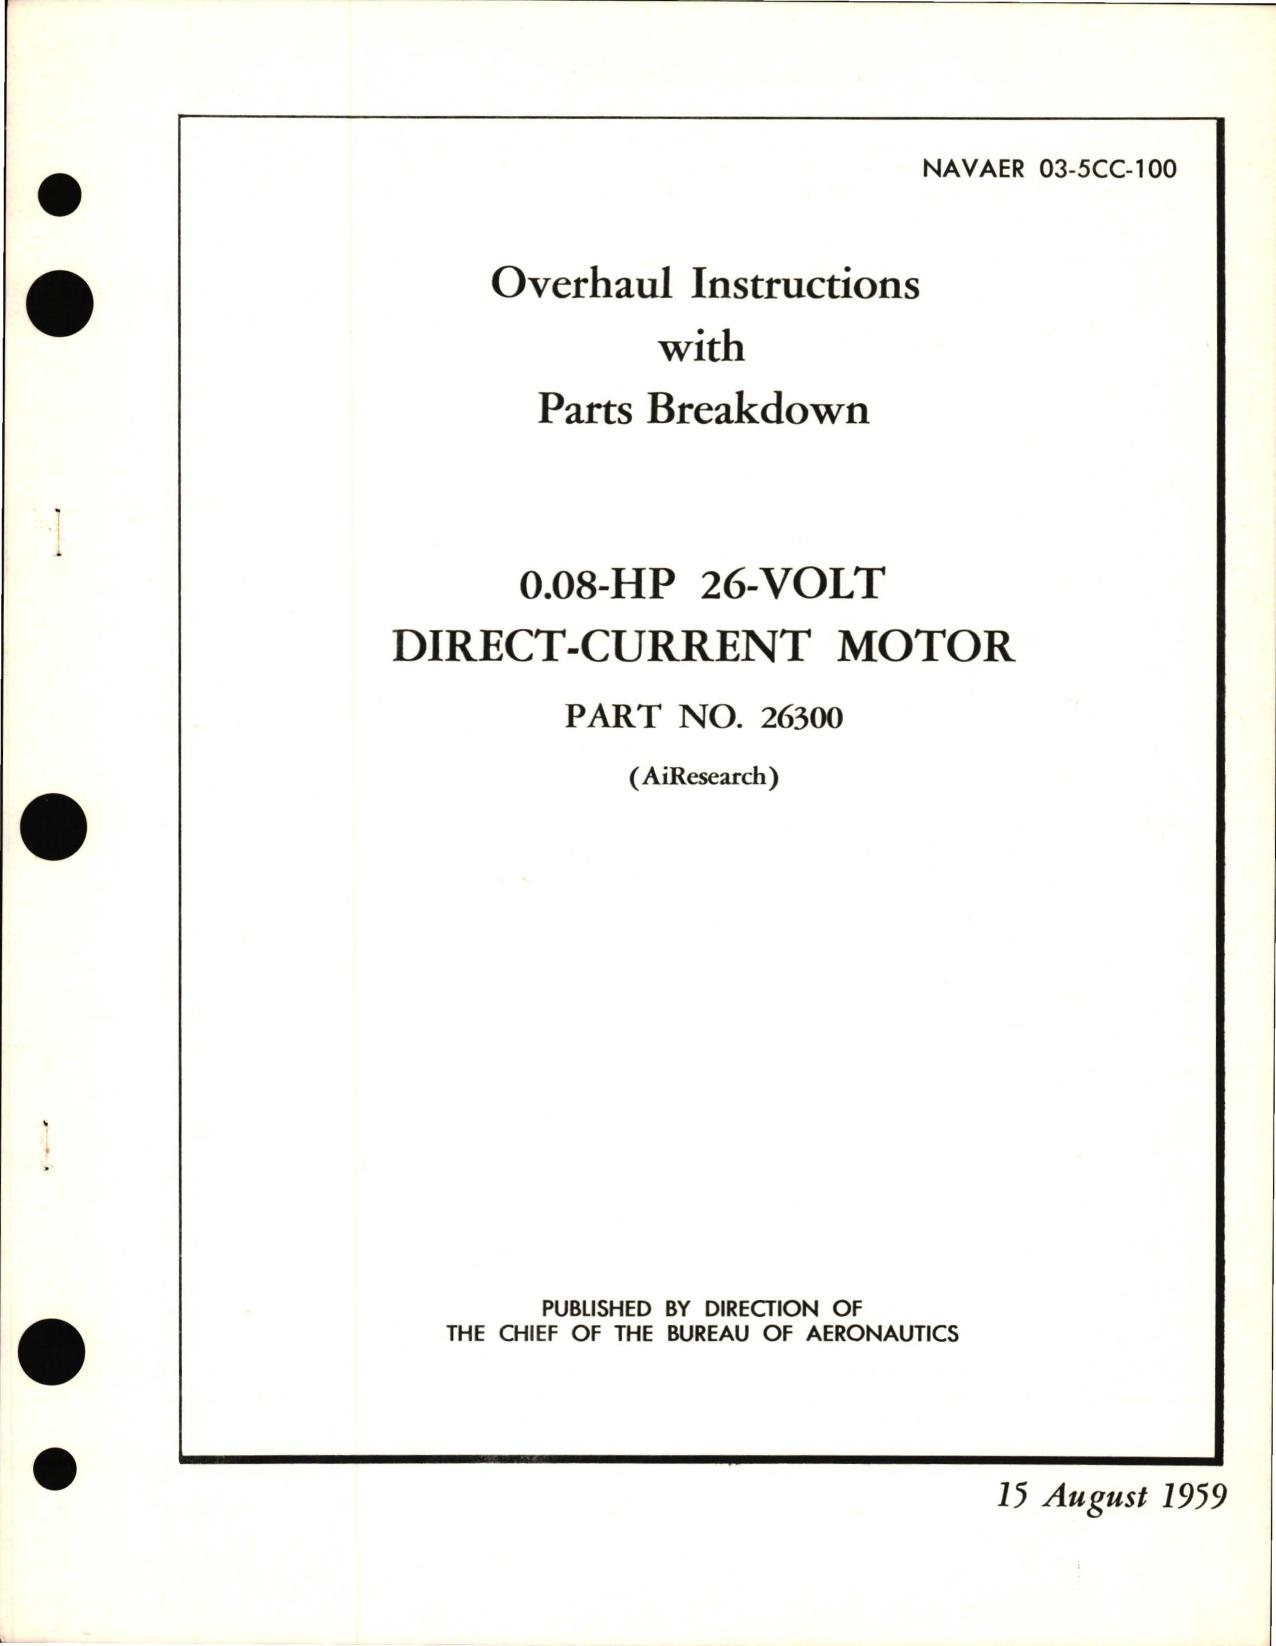 Sample page 1 from AirCorps Library document: Overhaul Instructions with Parts Breakdown for HP 26 Volt Direct Current Motor 0.08 Part 26300